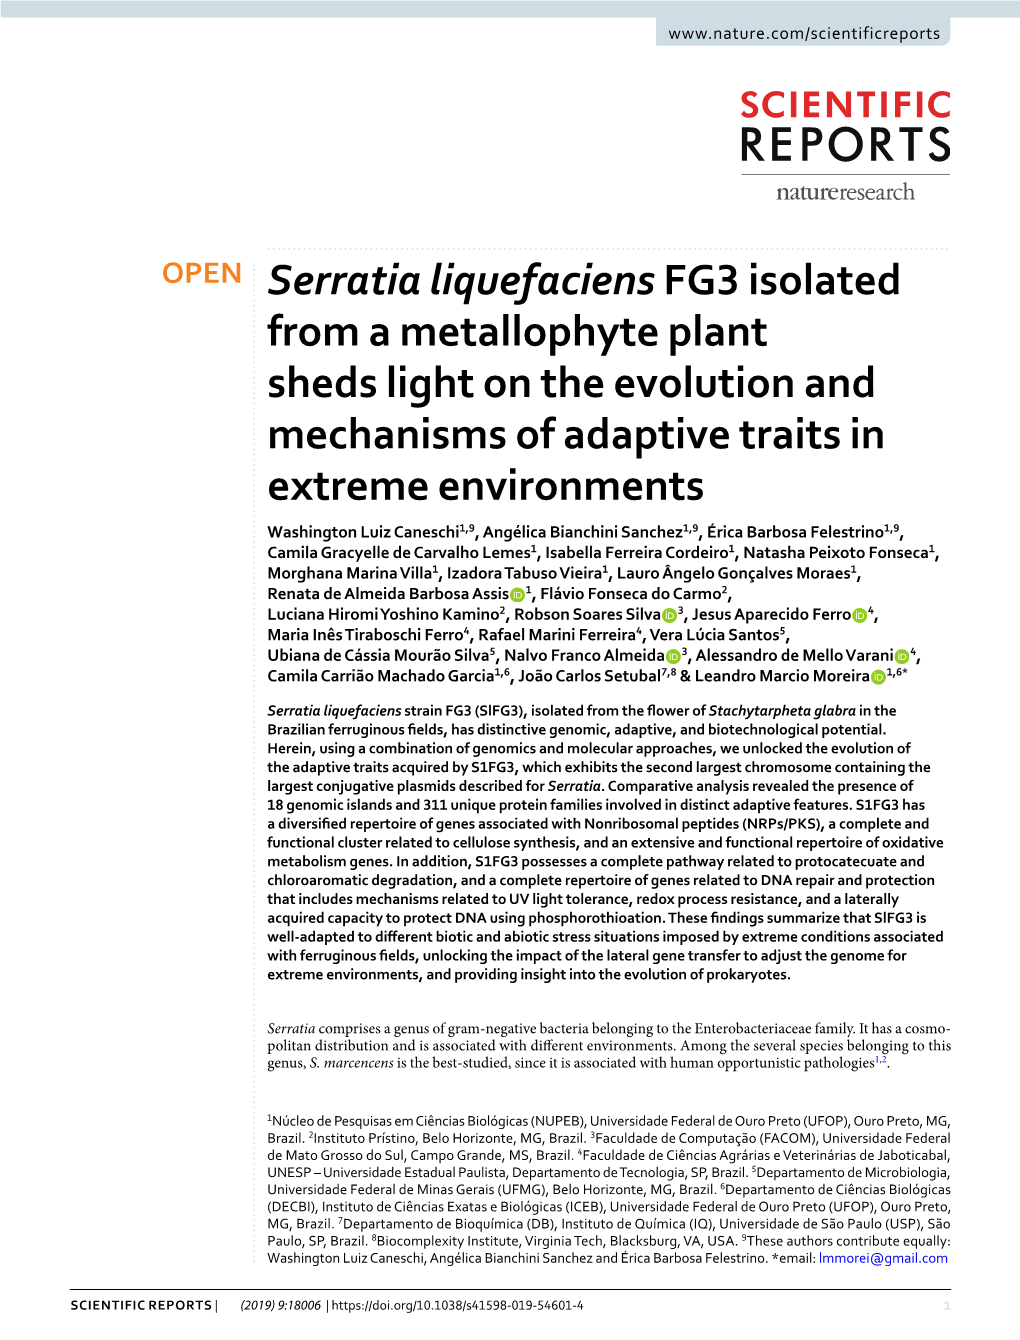 Serratia Liquefaciensfg3 Isolated from a Metallophyte Plant Sheds Light On